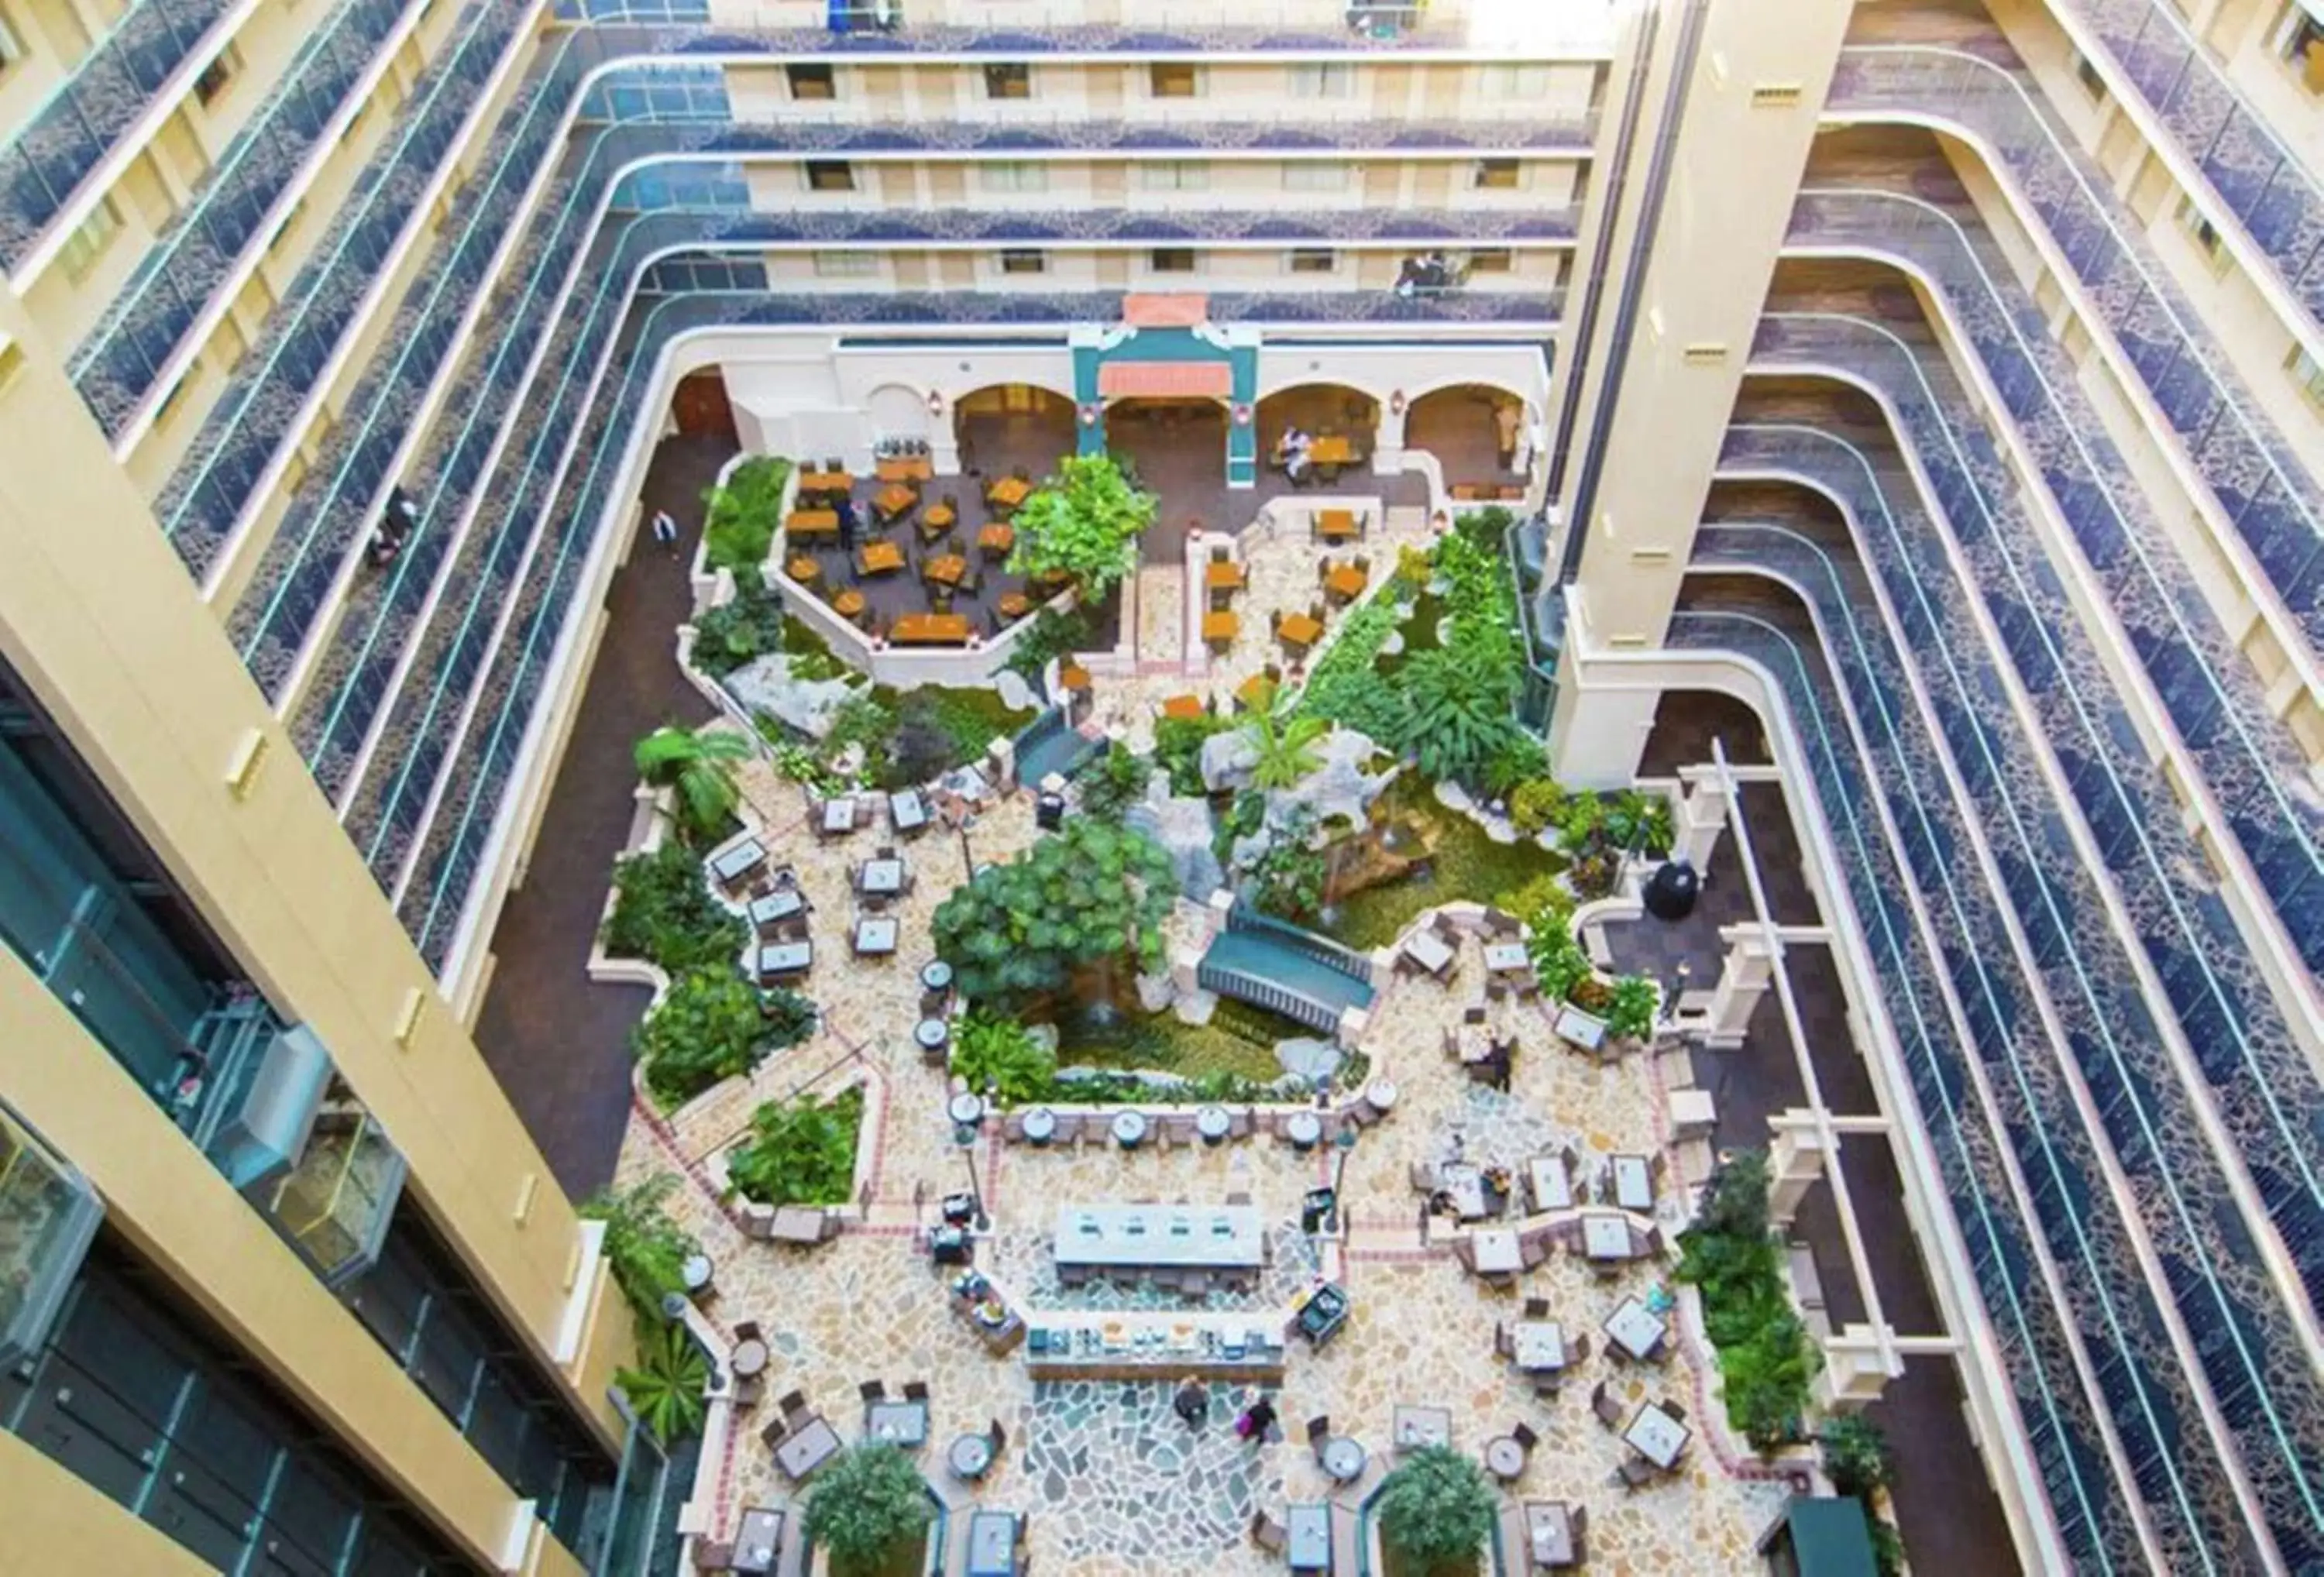 Property building, Bird's-eye View in Embassy Suites by Hilton Fort Lauderdale 17th Street